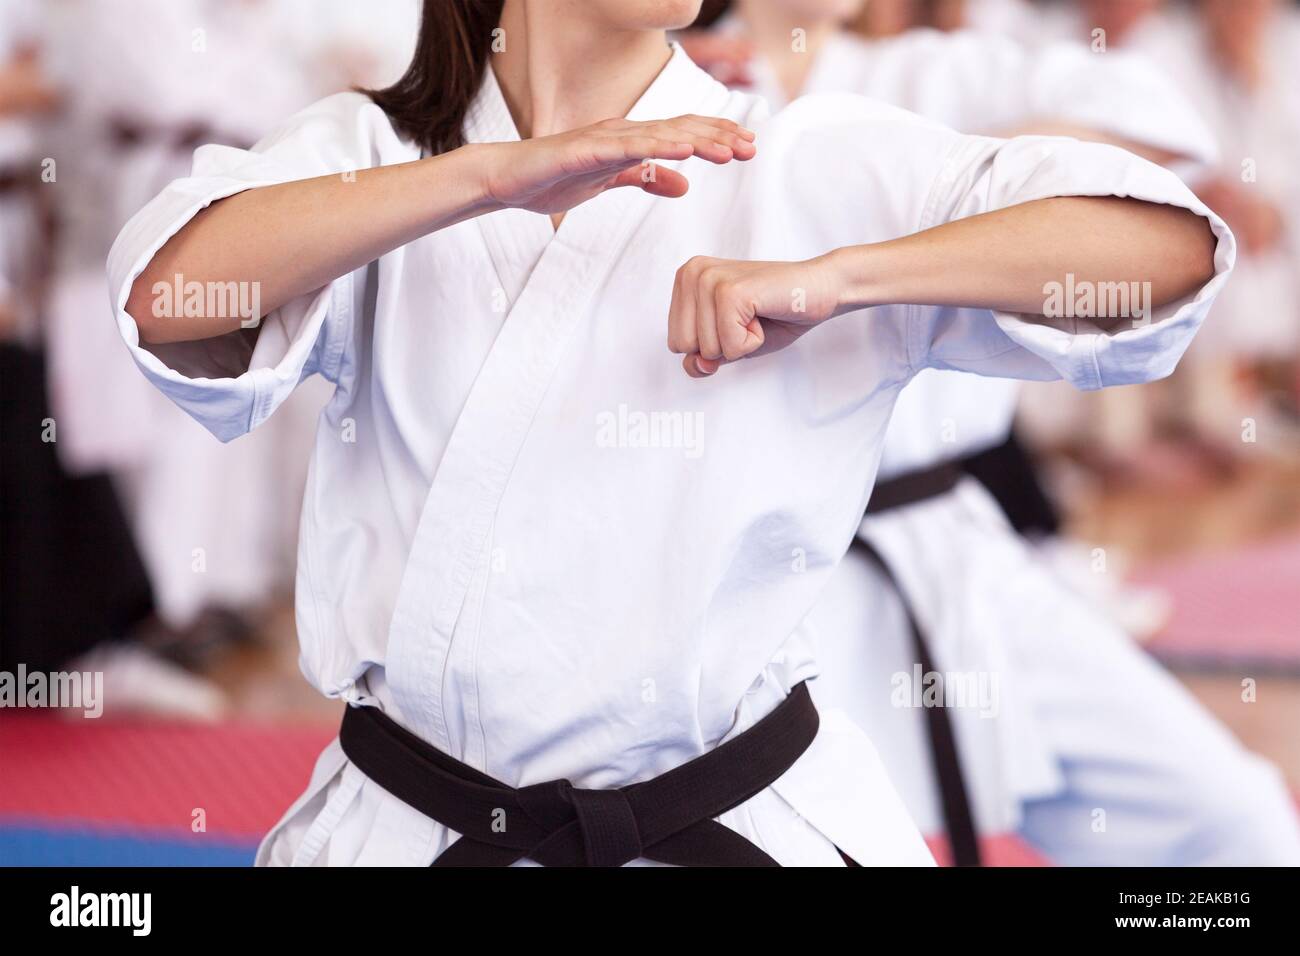 Female karate practitioner body position during training. Martial arts. Stock Photo